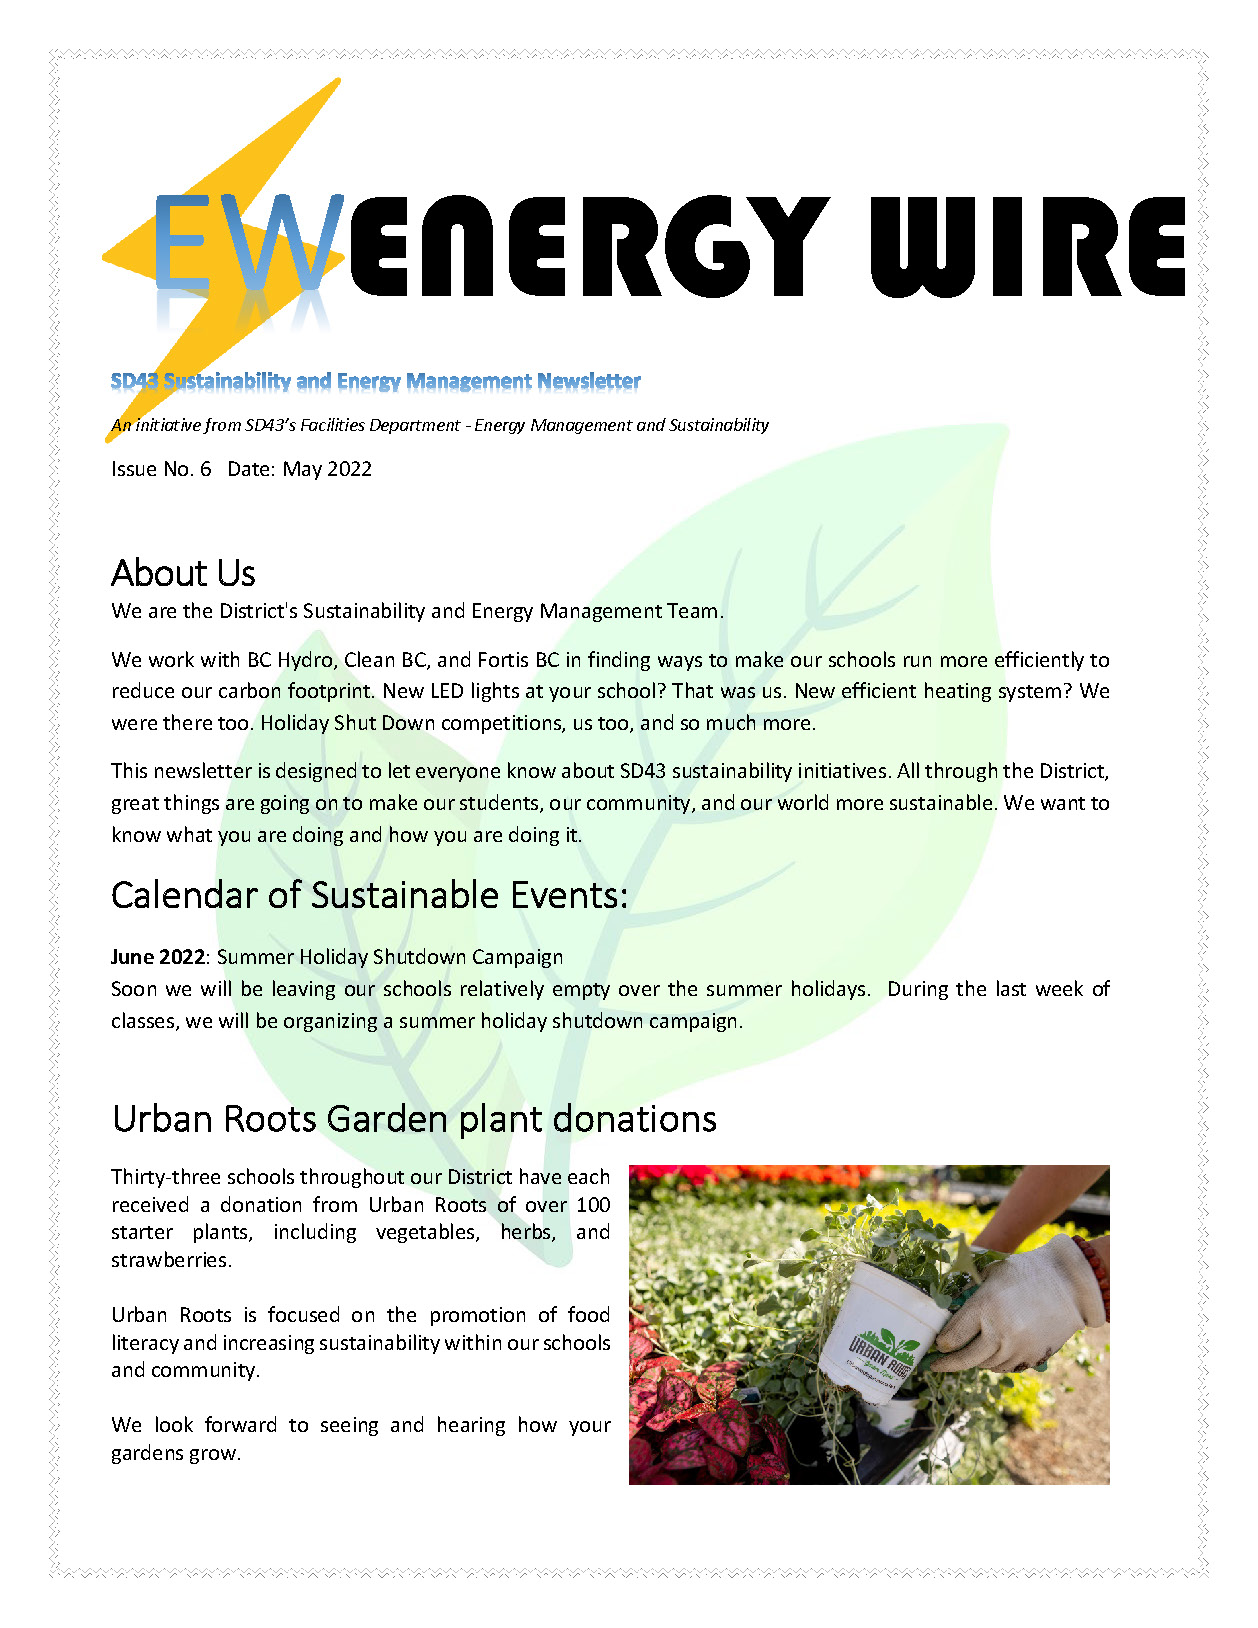 Energy Wire Newsletter May 2022_Page_1.jpg